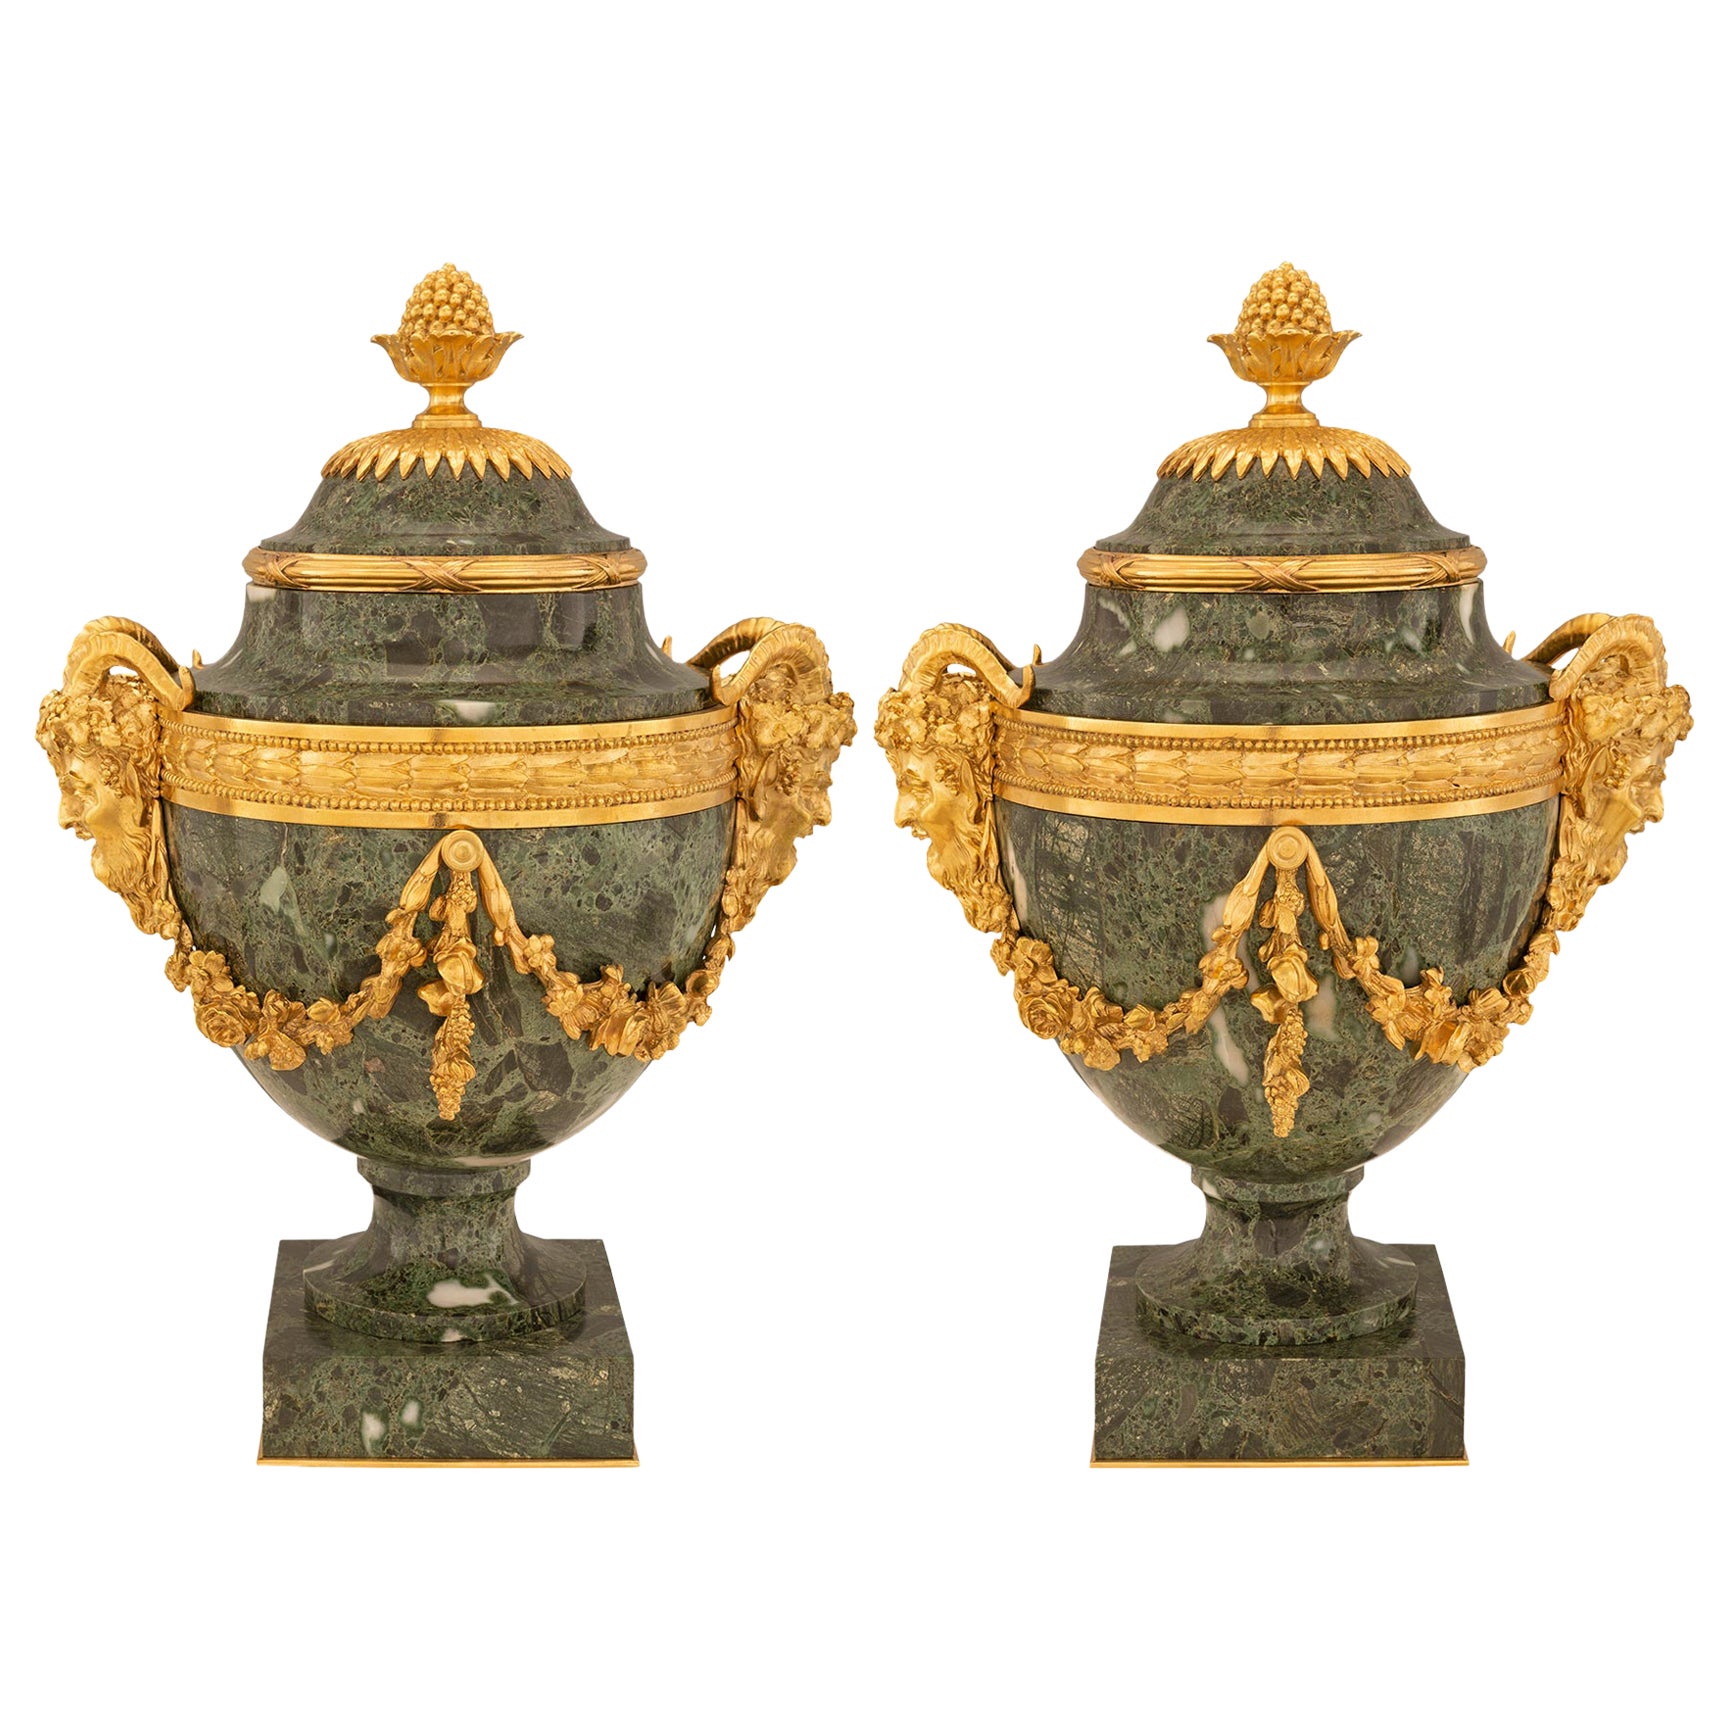 Pair of French 19th Century Belle Époque Period Marble and Ormolu Urns For Sale